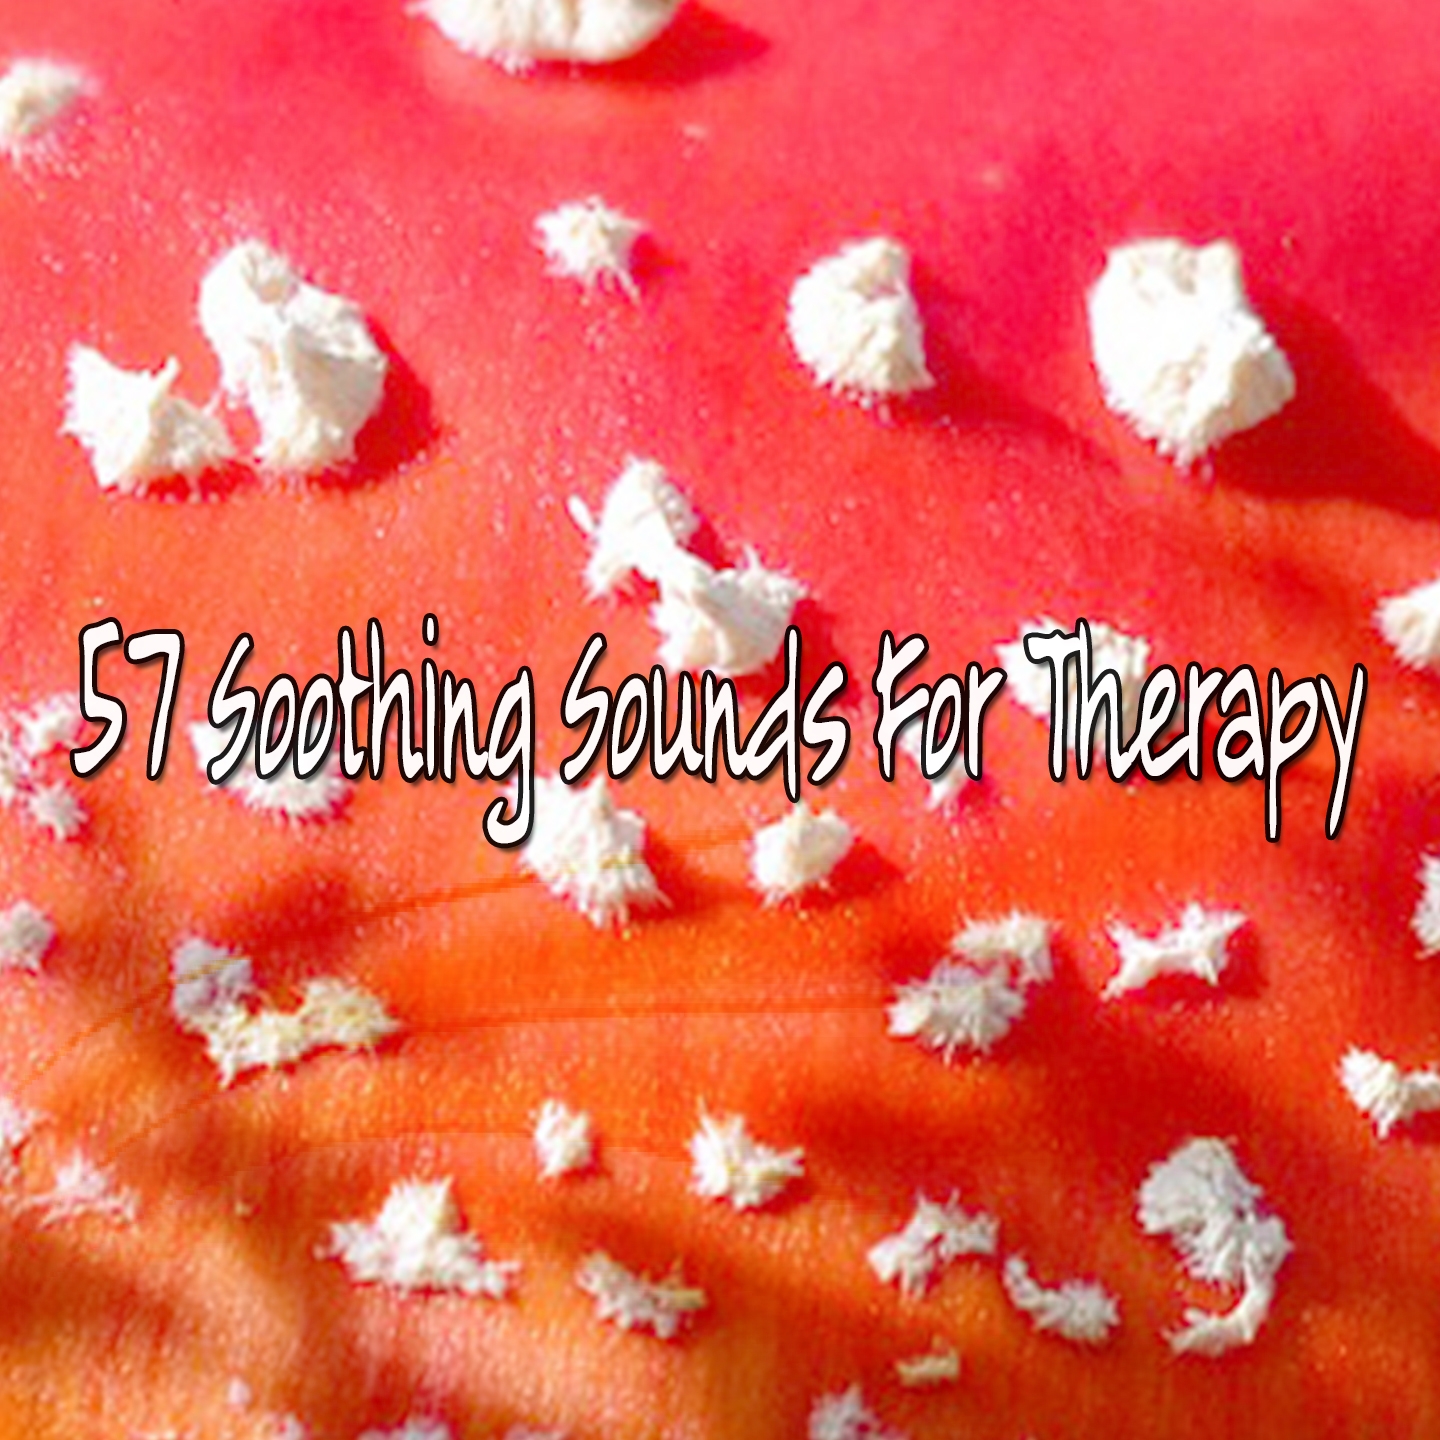 57 Soothing Sounds For Therapy